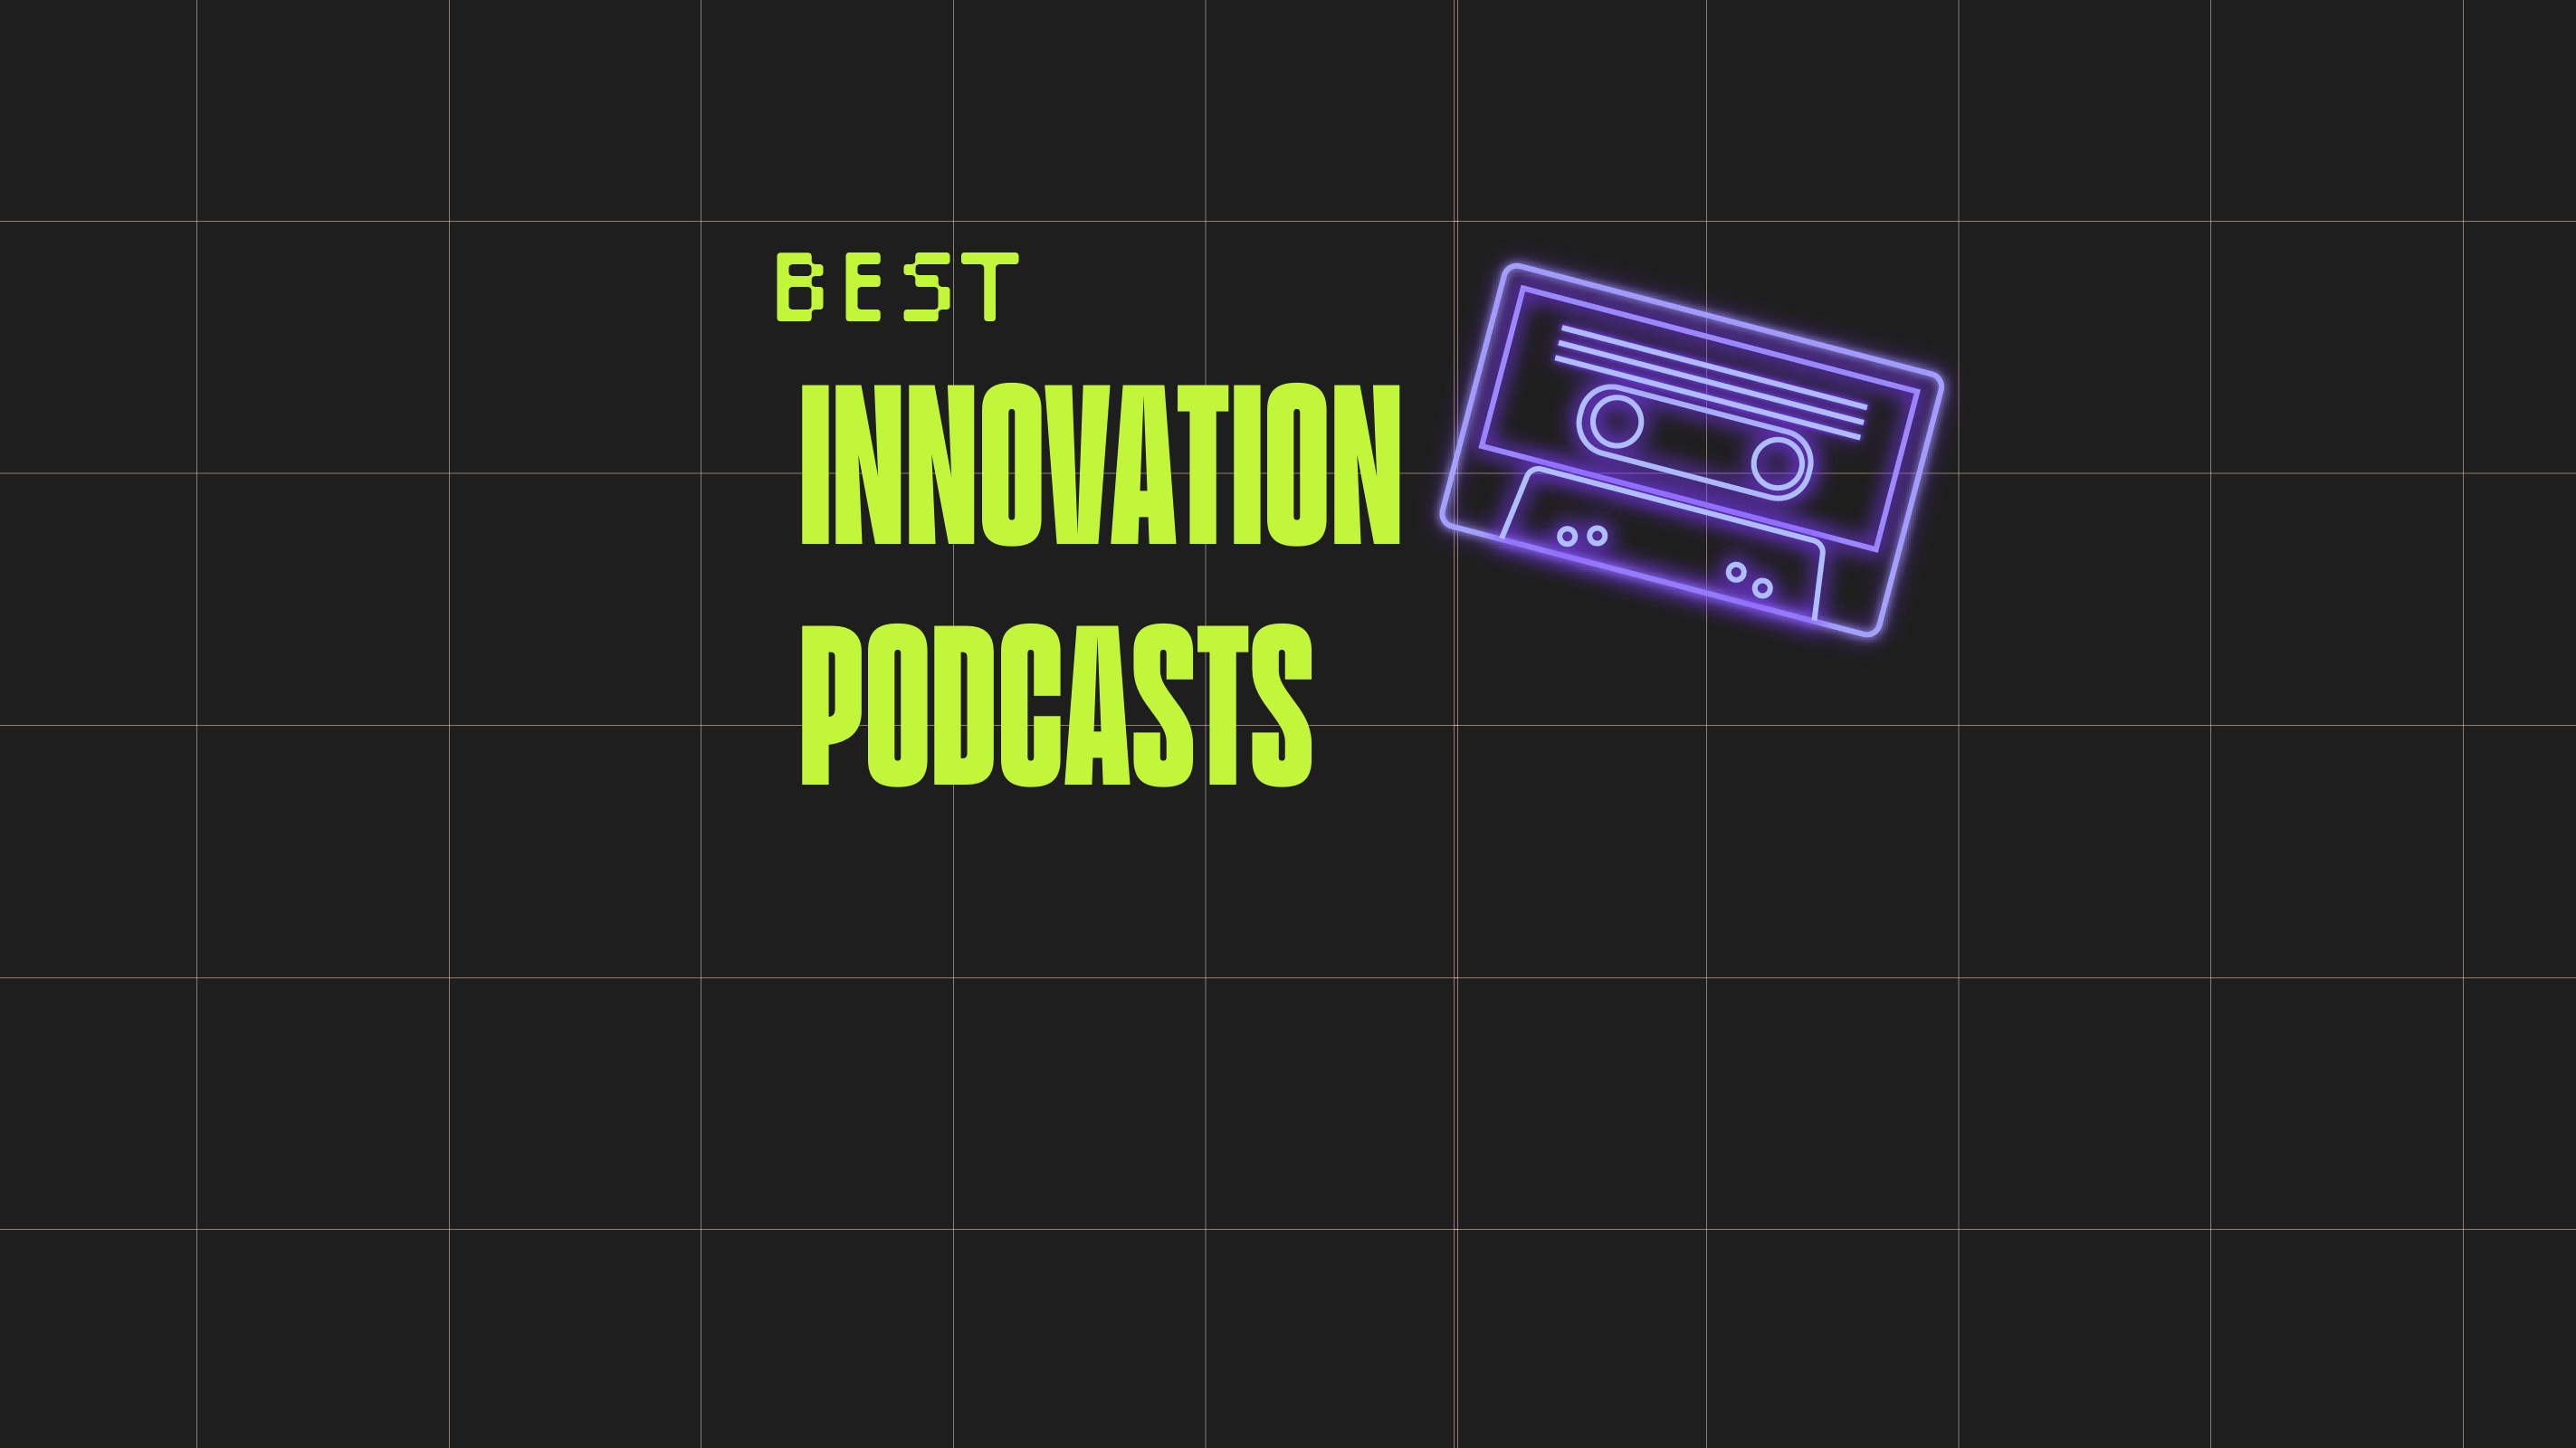 CTO-innovation-podcasts-featured-image-8392